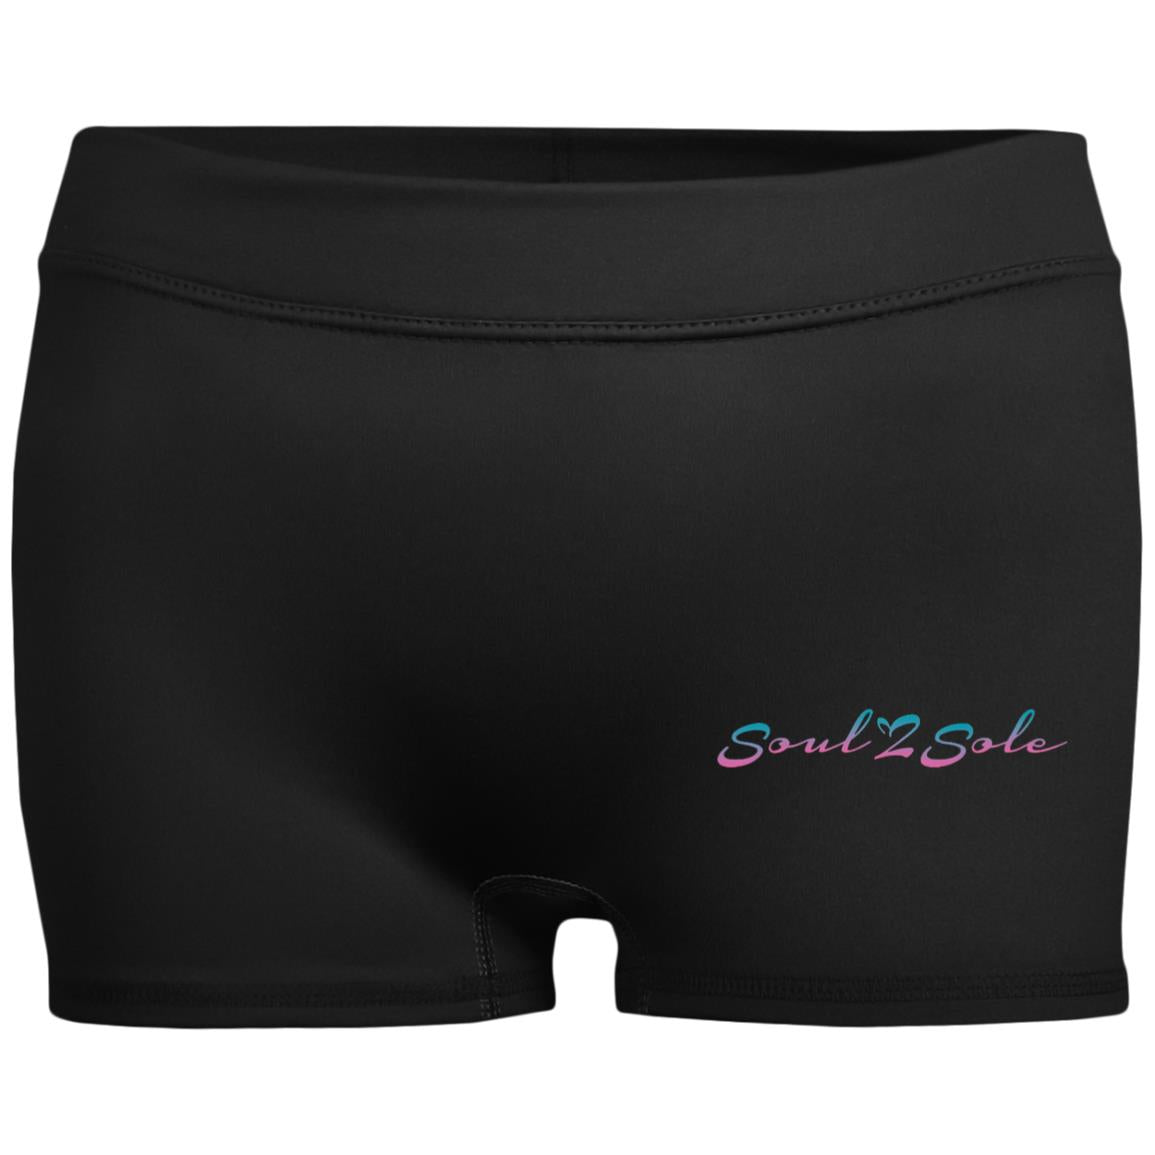 S2S Ladies' Fitted Moisture-Wicking 2.5 inch Inseam Shorts